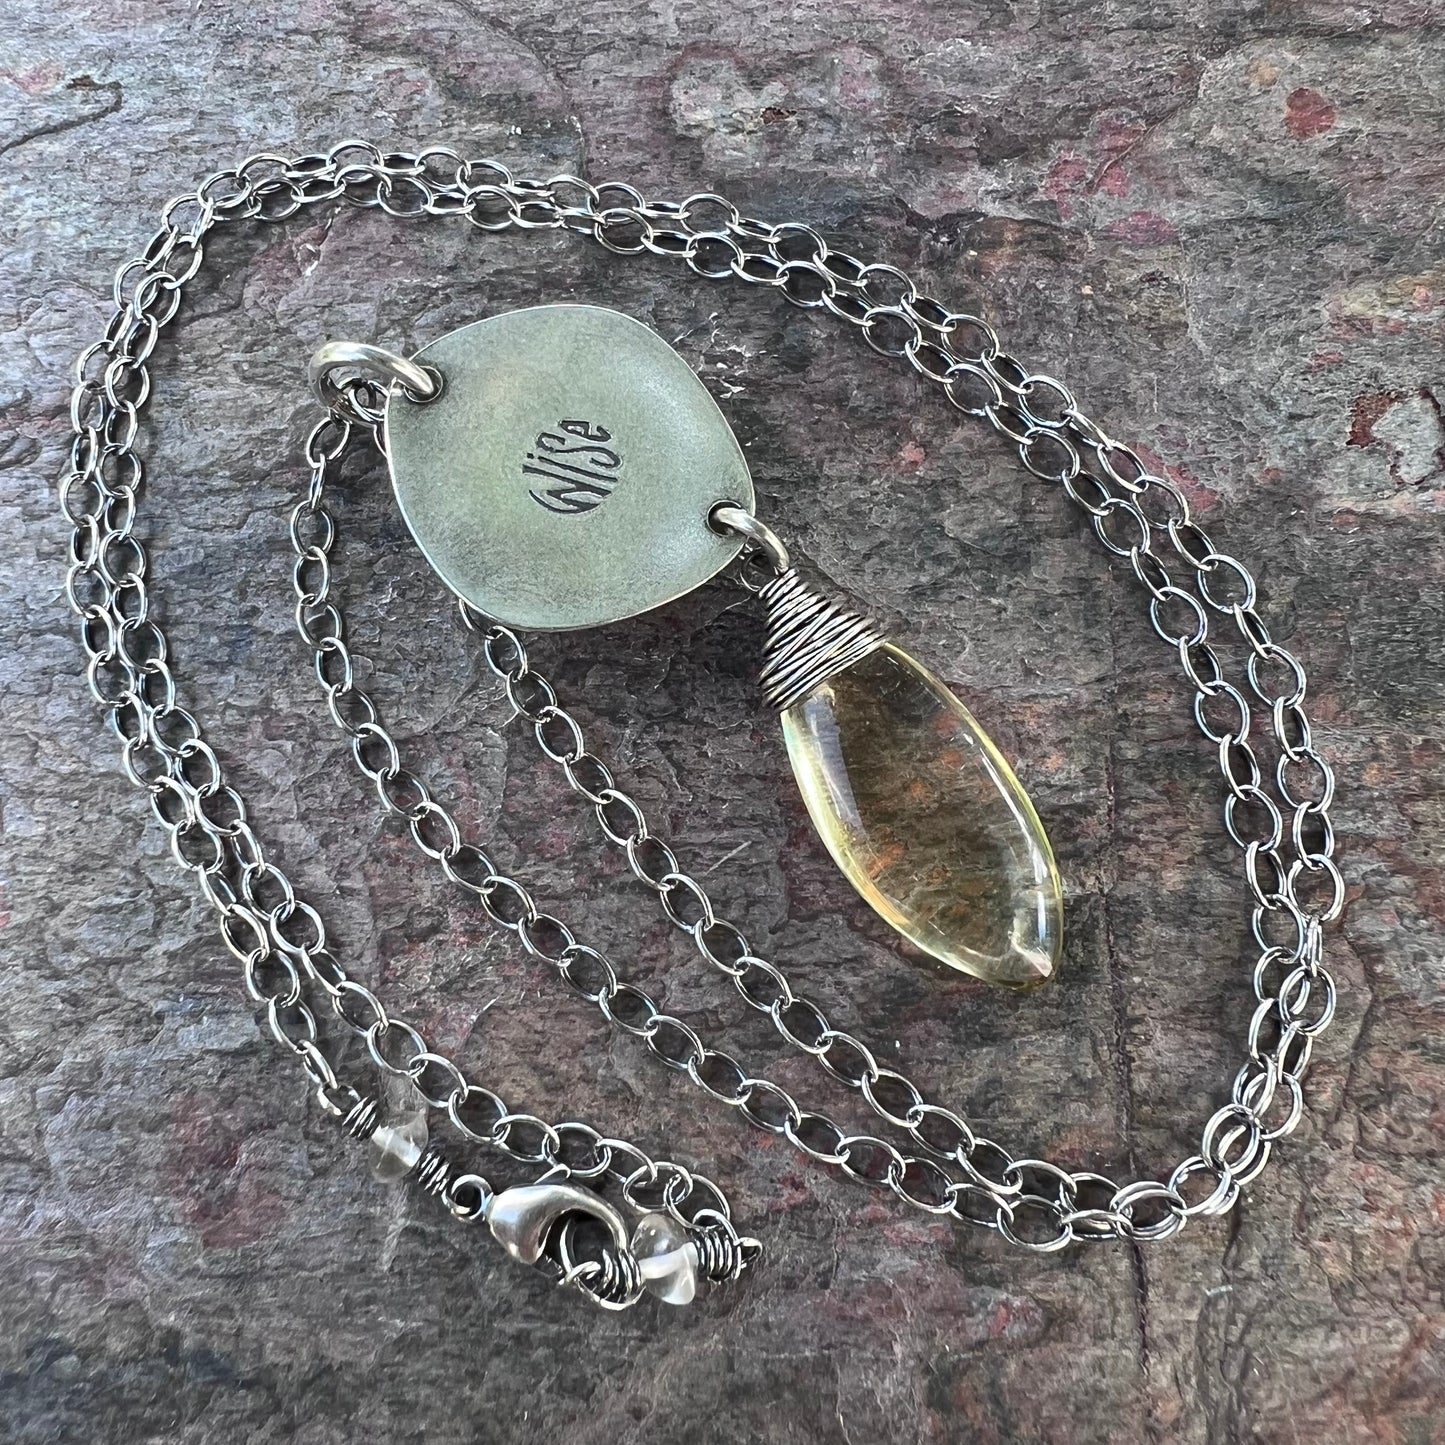 Sterling Silver Variscite and Citrine Necklace - One-of-a-Kind Pendant on Sterling Silver Chain